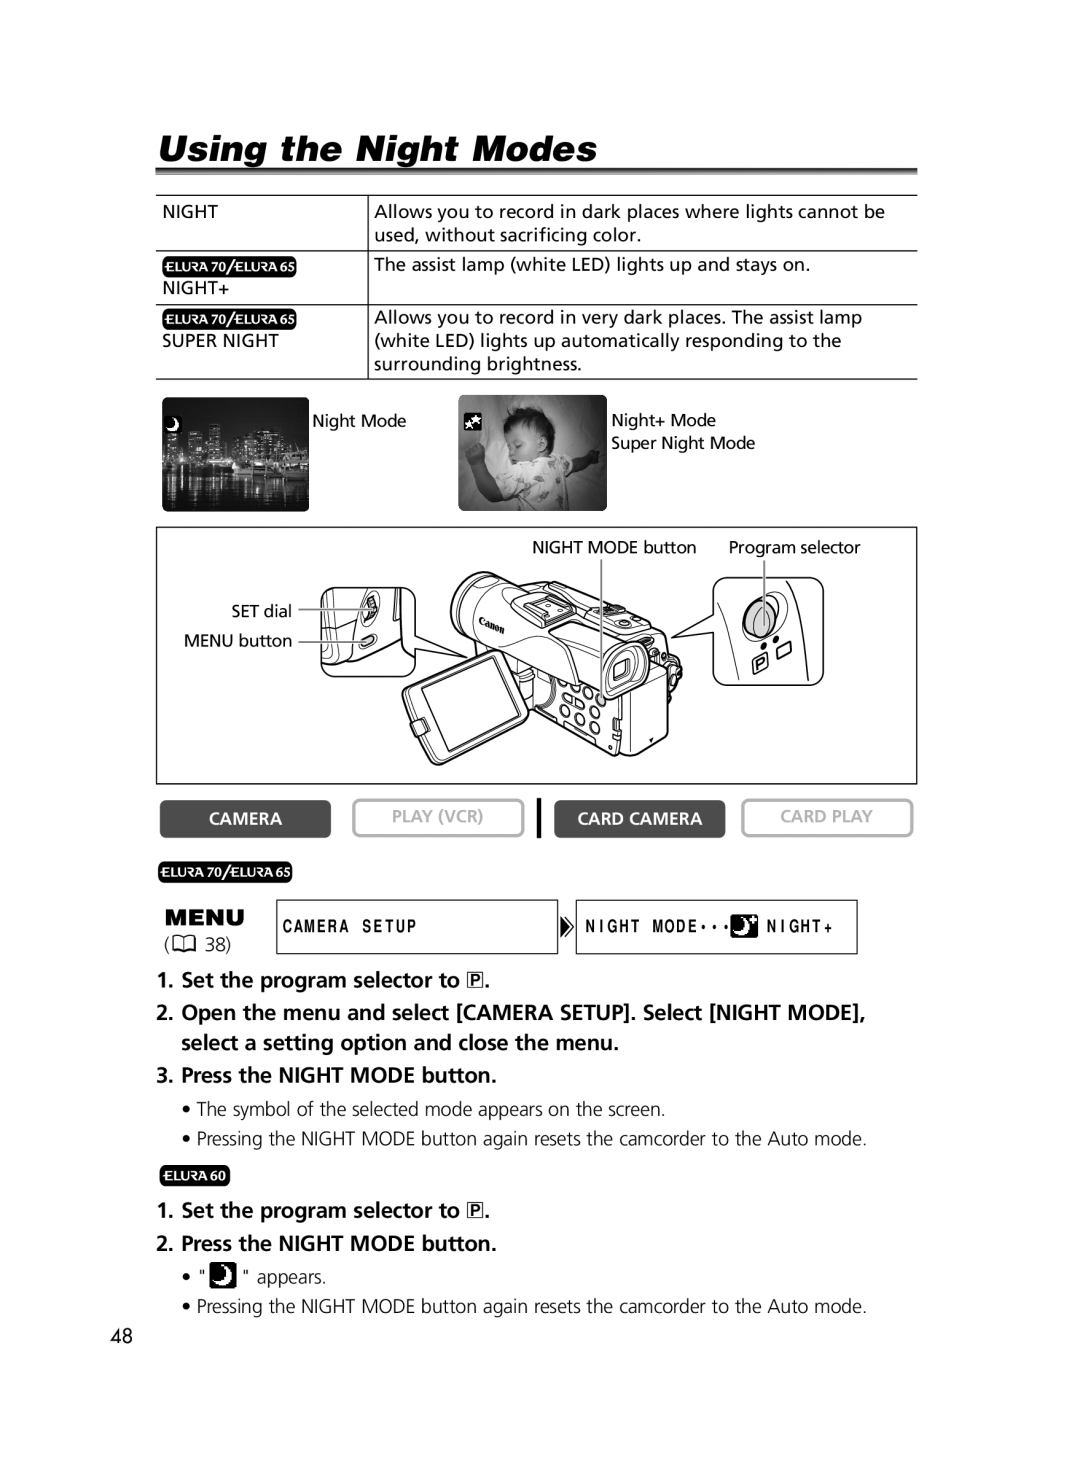 Canon 60, 65 instruction manual Using the Night Modes, Set the program selector to Q, Press the NIGHT MODE button 